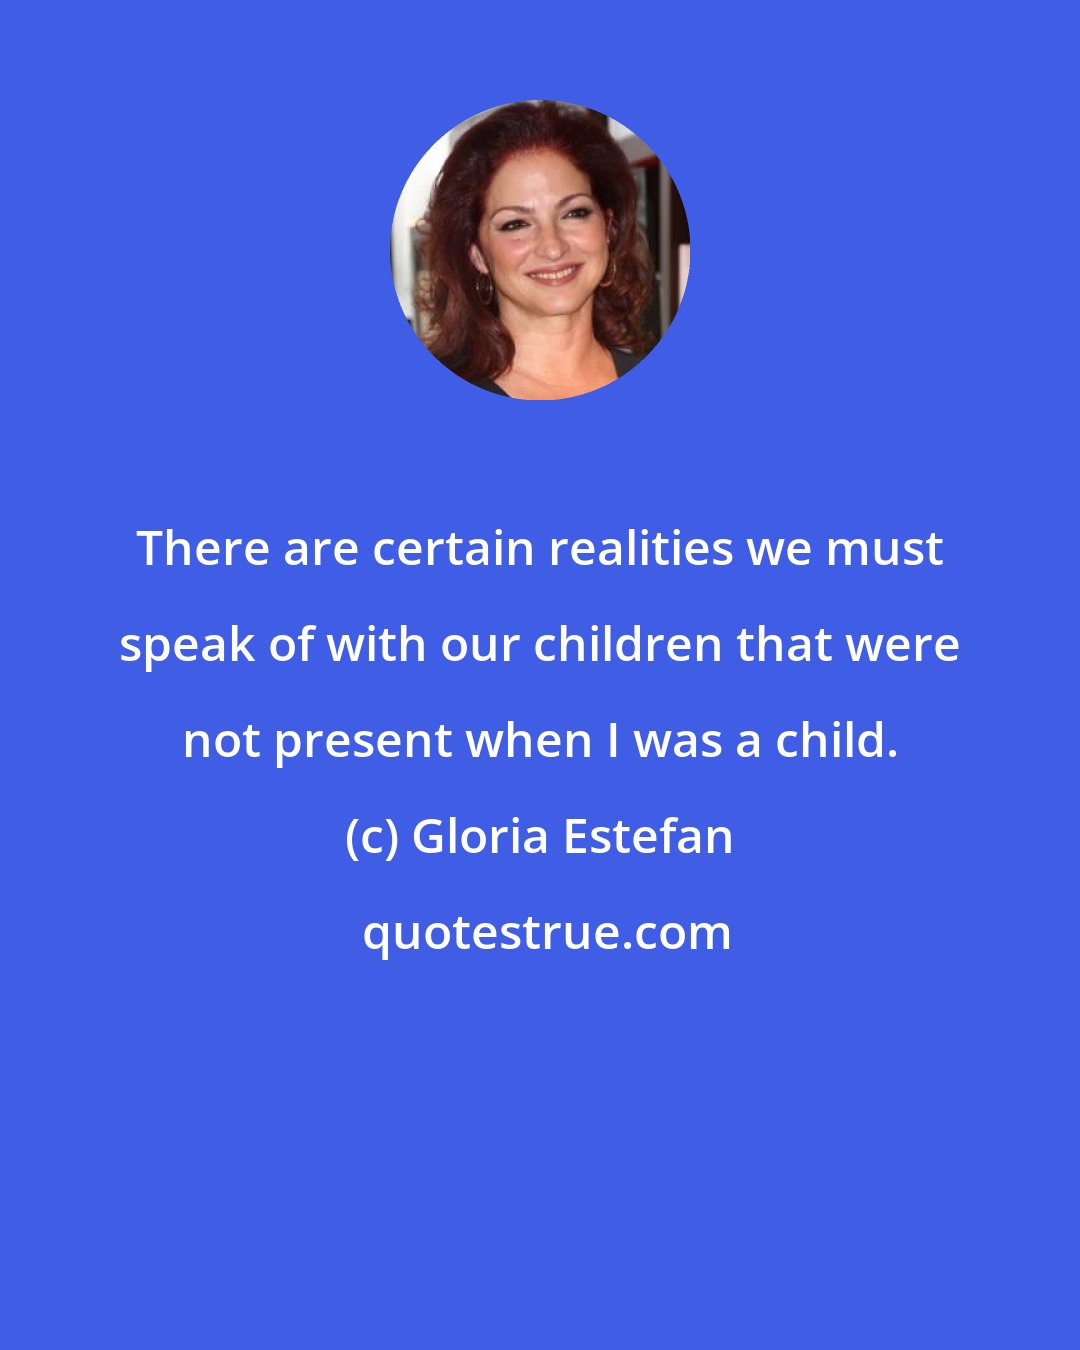 Gloria Estefan: There are certain realities we must speak of with our children that were not present when I was a child.